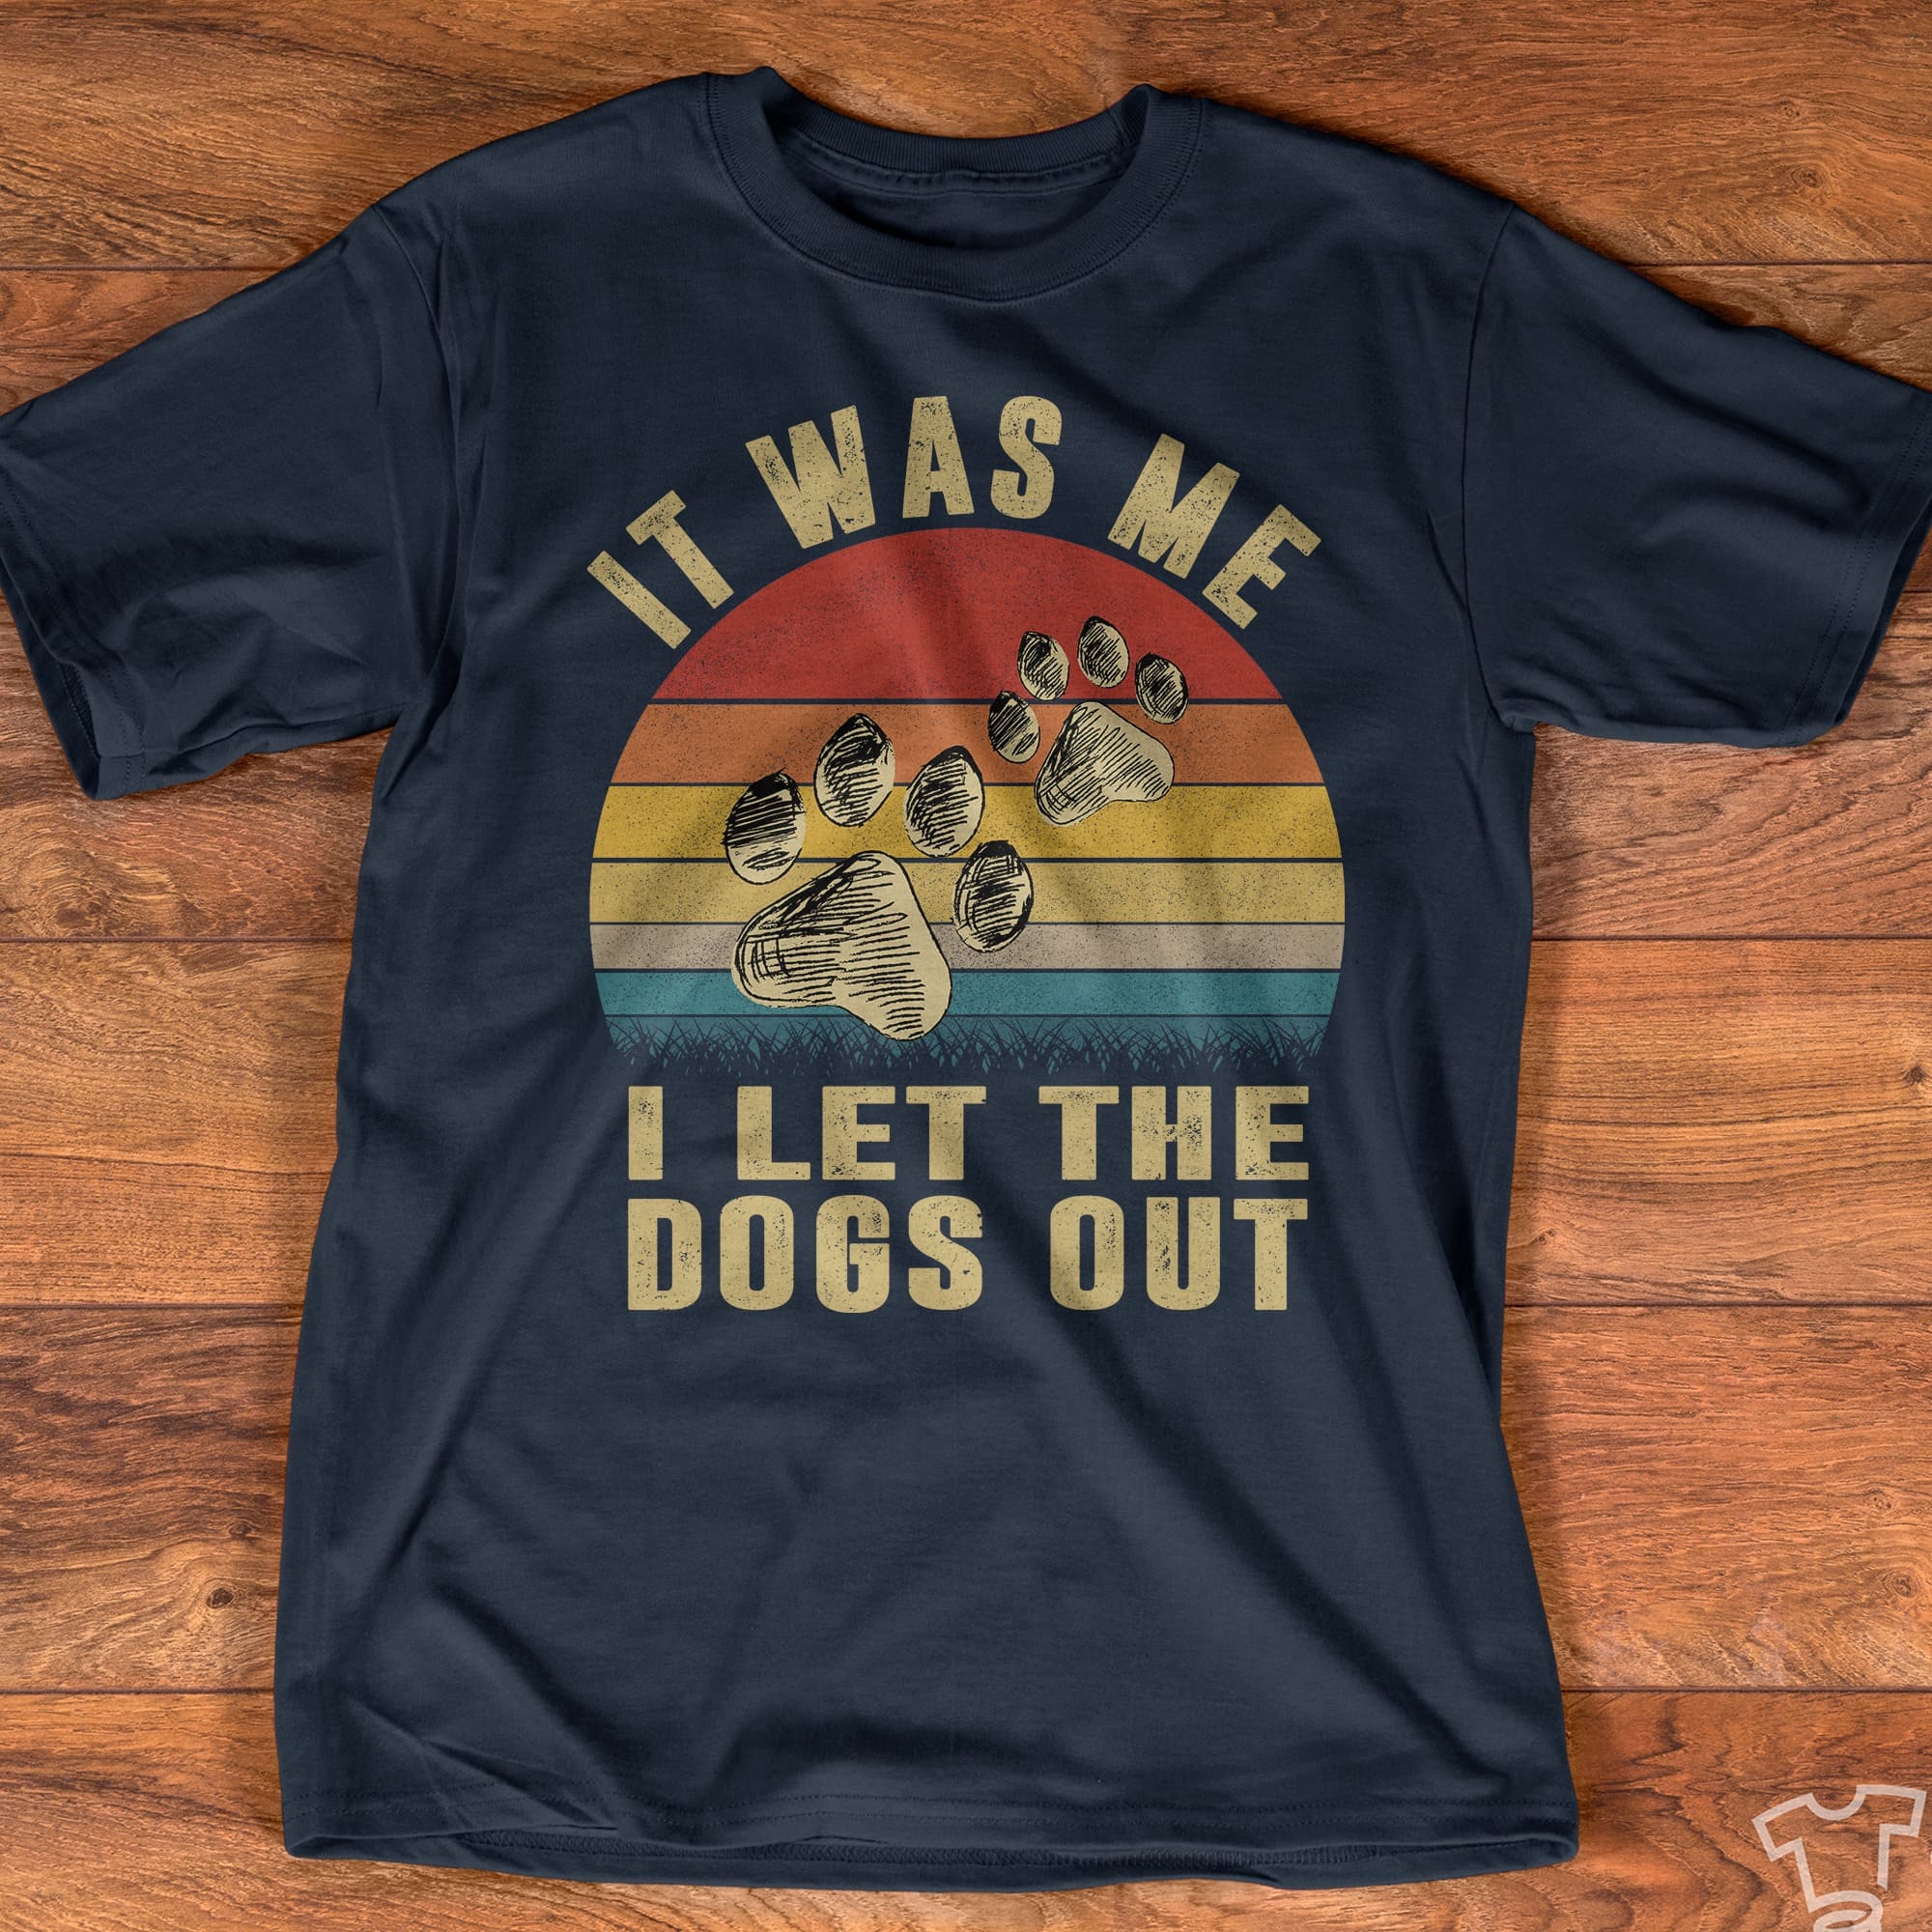 It was me I let the dogs out - Rescue dog animal, dog lover T-shirt